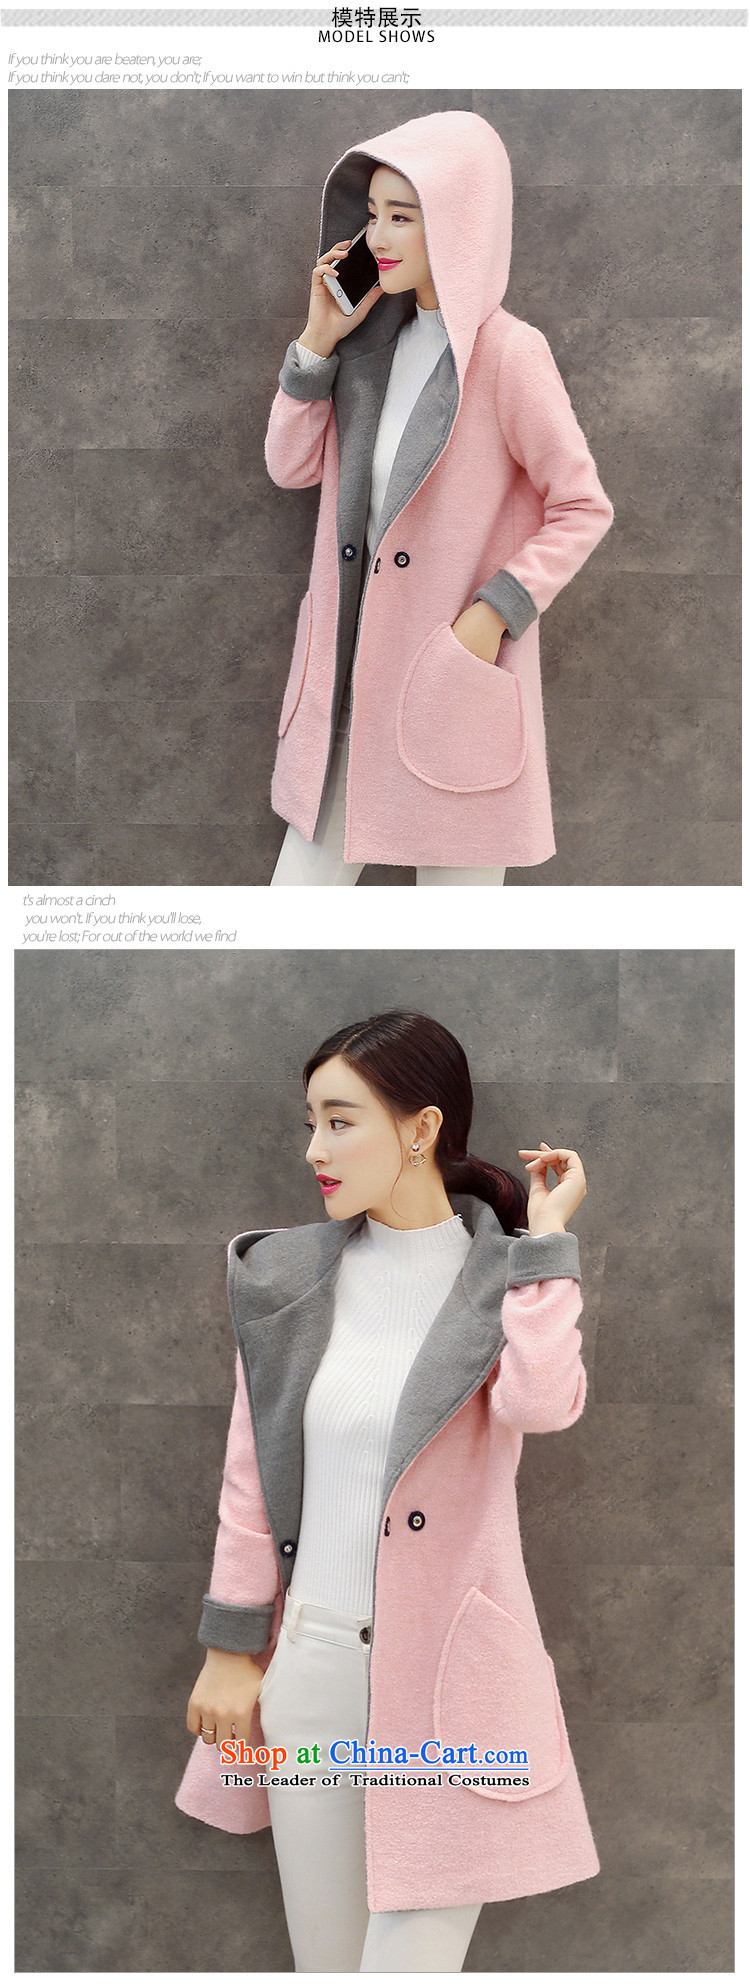 All Daphne 2015 Autumn and Winter Female Wind Jacket loose large Korean edition thickness of small-wind aristocratic thin, long-video 